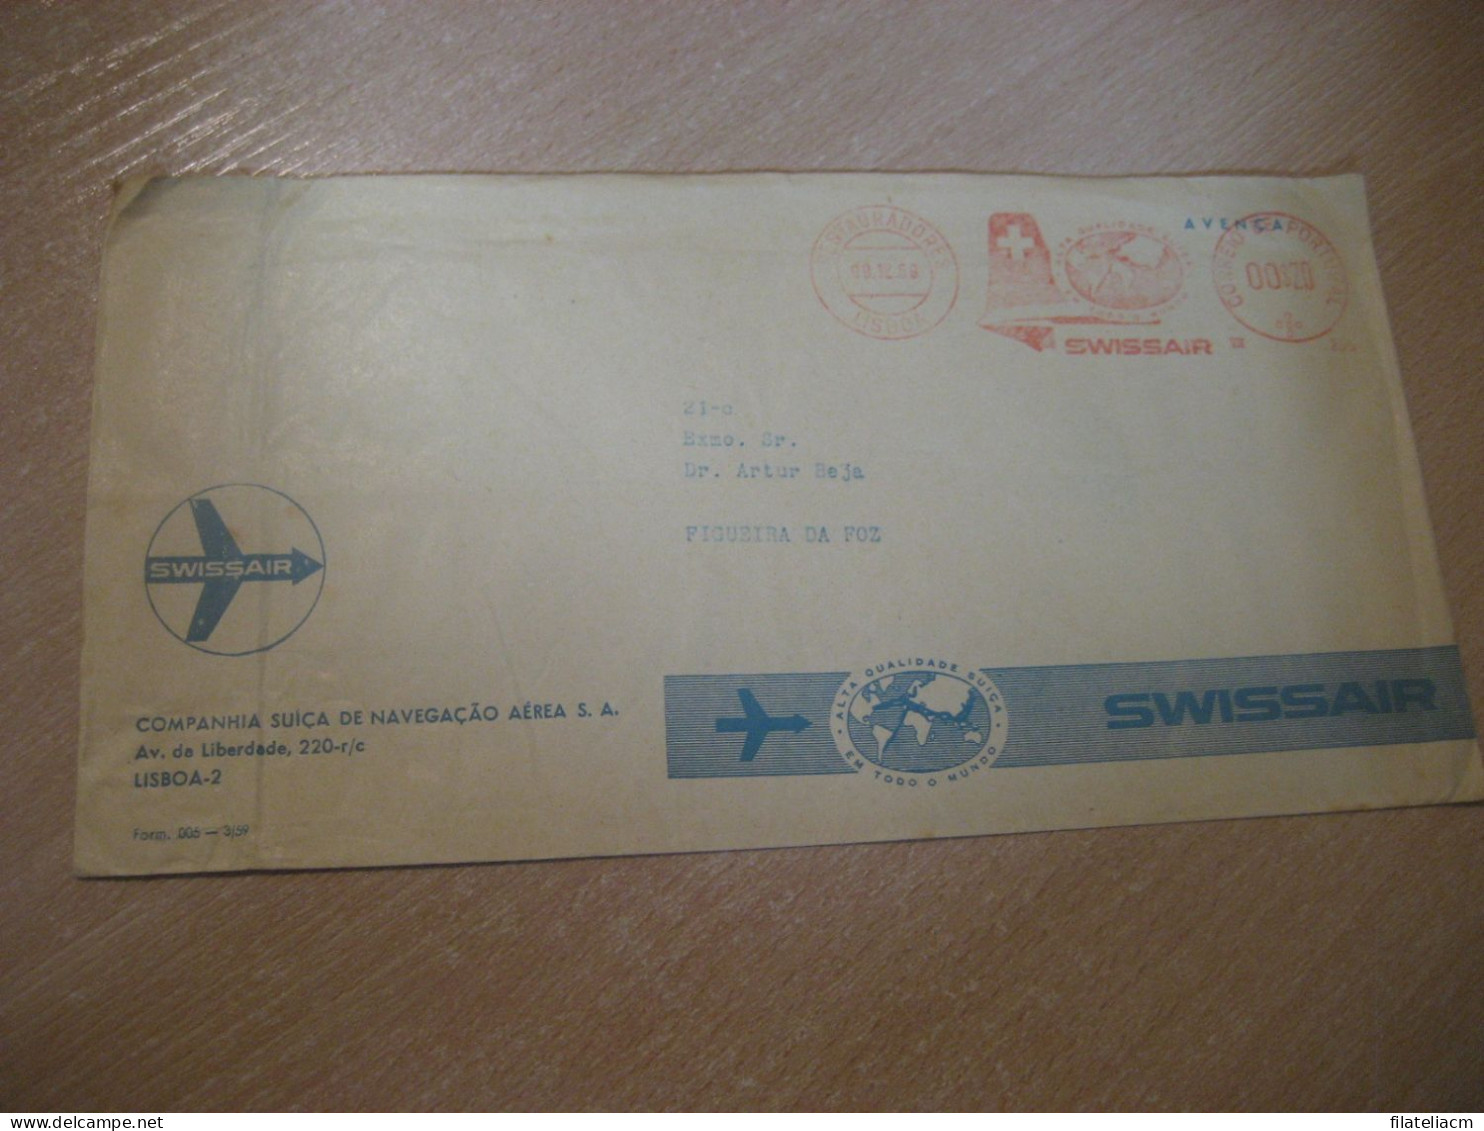 LISBOA 1959 To Figueira Da Foz SWISSAIR Airline Airlines Flight Meter Mail Cancel Cover PORTUGAL - Lettres & Documents